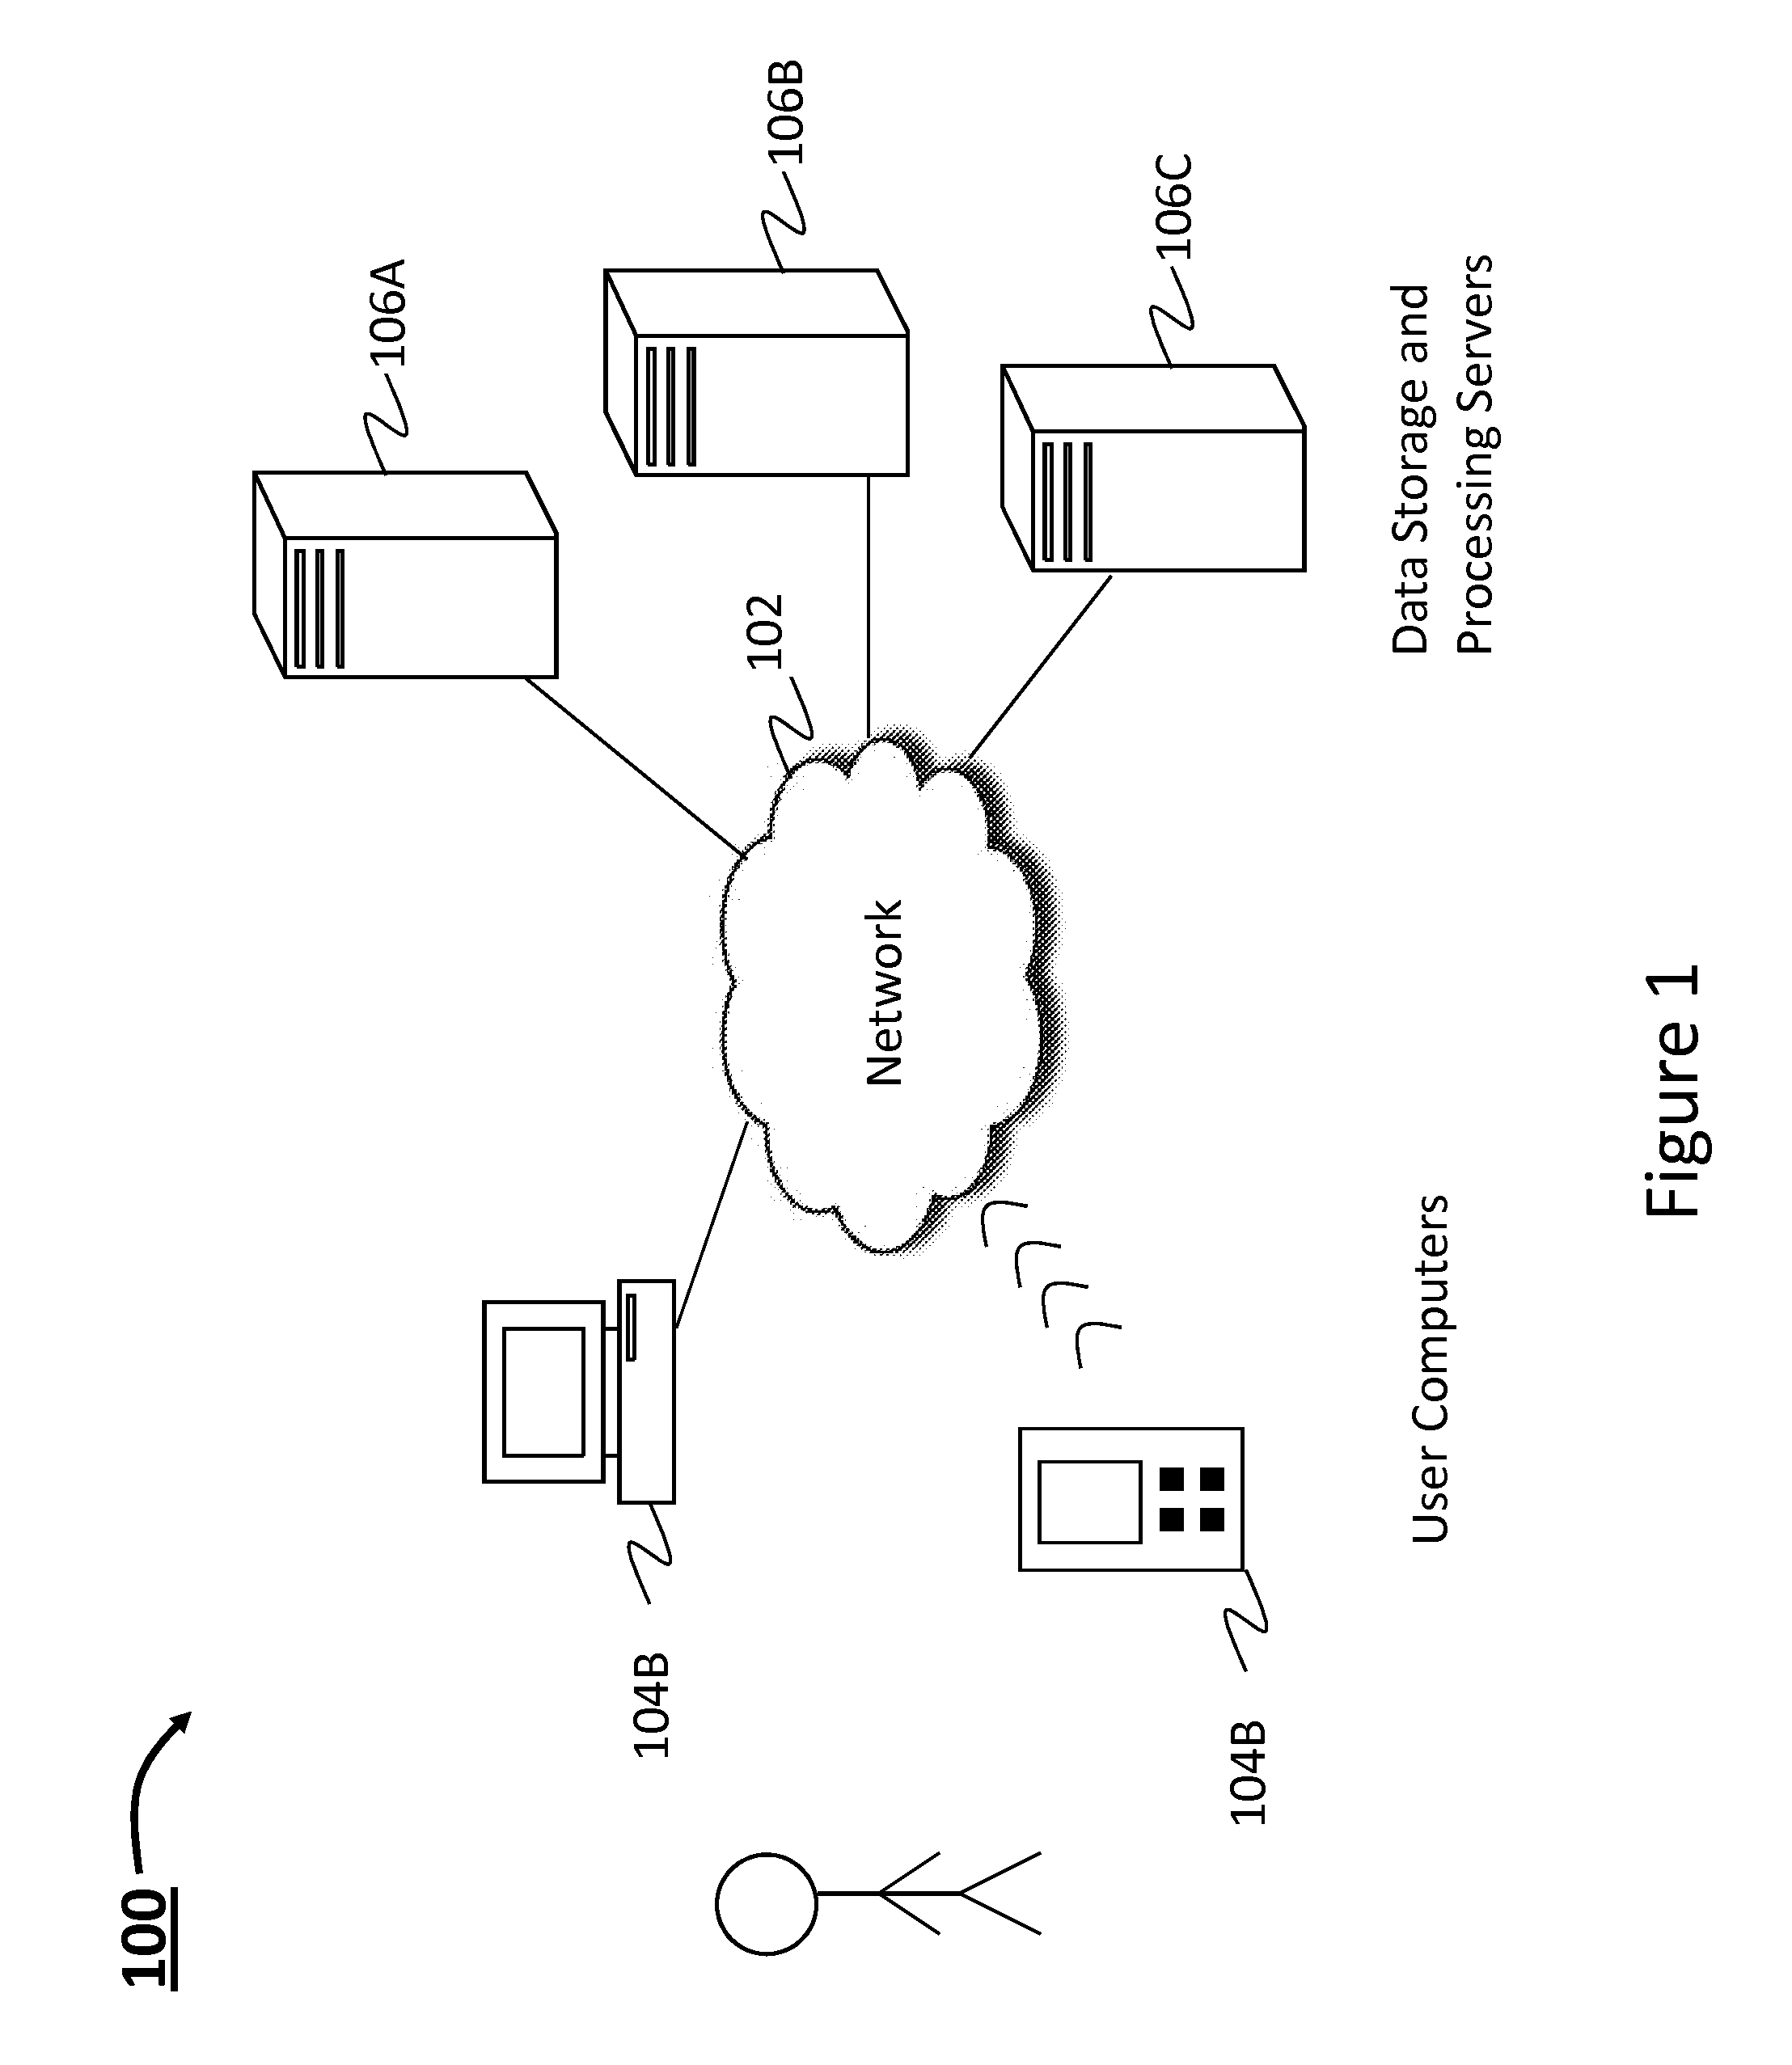 Contract authoring system and method